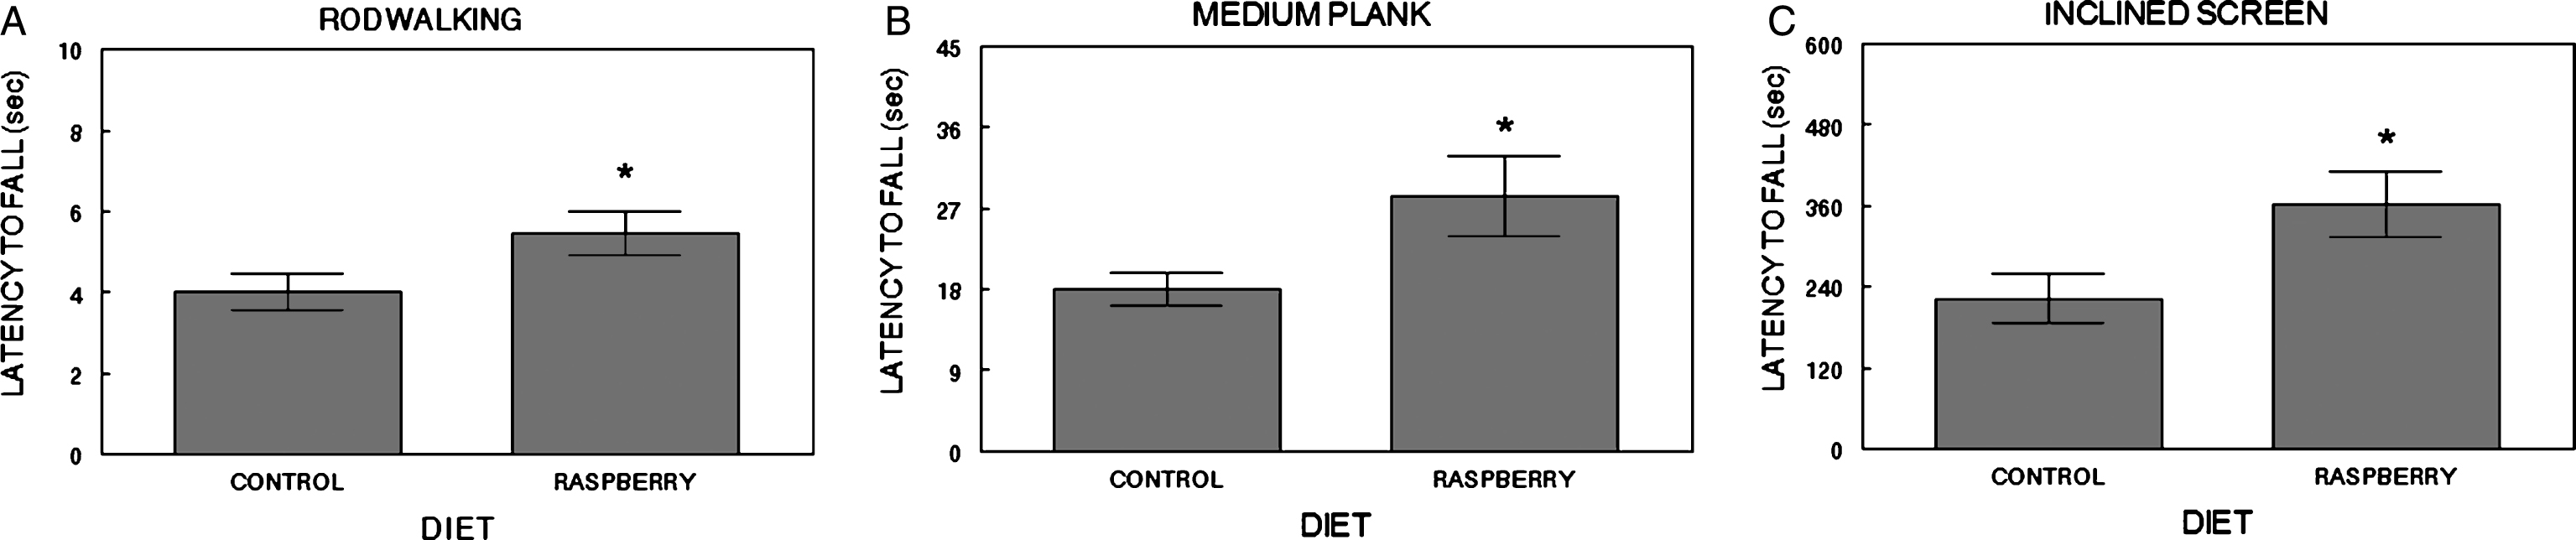 Psychomotor performance: The 2% raspberry diet group had longer latencies to fall (mean±SEM: secs) on the rod walk (A), medium plank walk (B) and the inclined screen (C) compared to the control group (*=p≤0.05, one-way ANOVA).